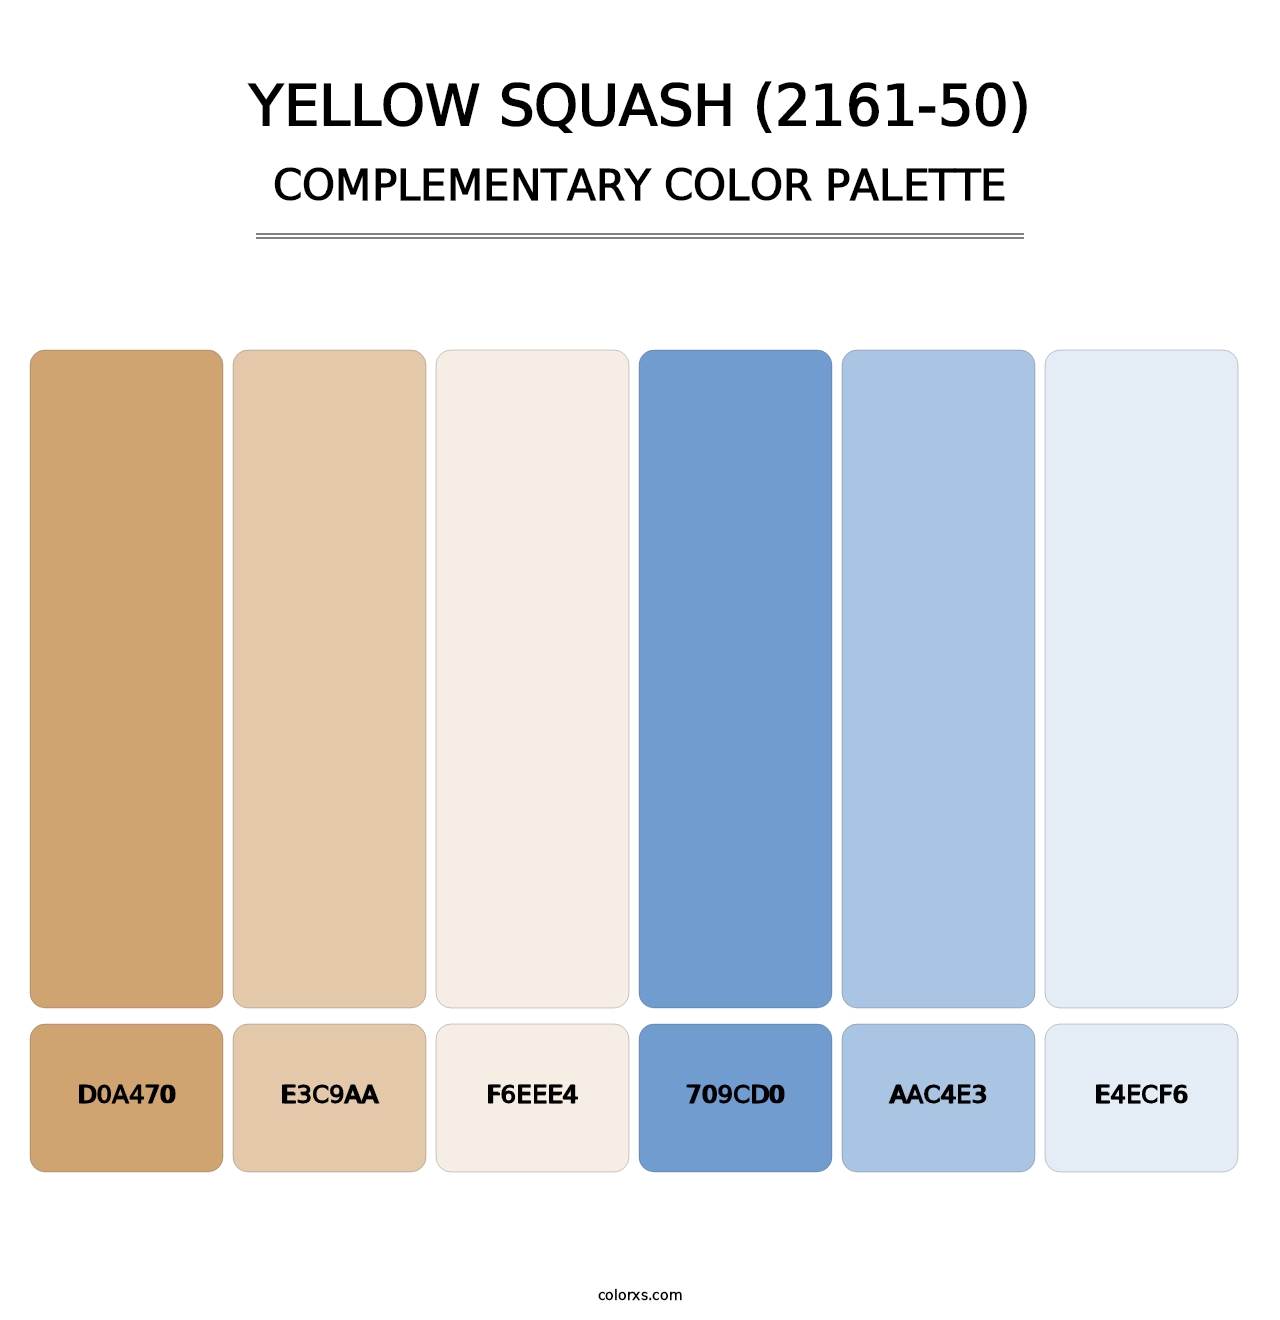 Yellow Squash (2161-50) - Complementary Color Palette